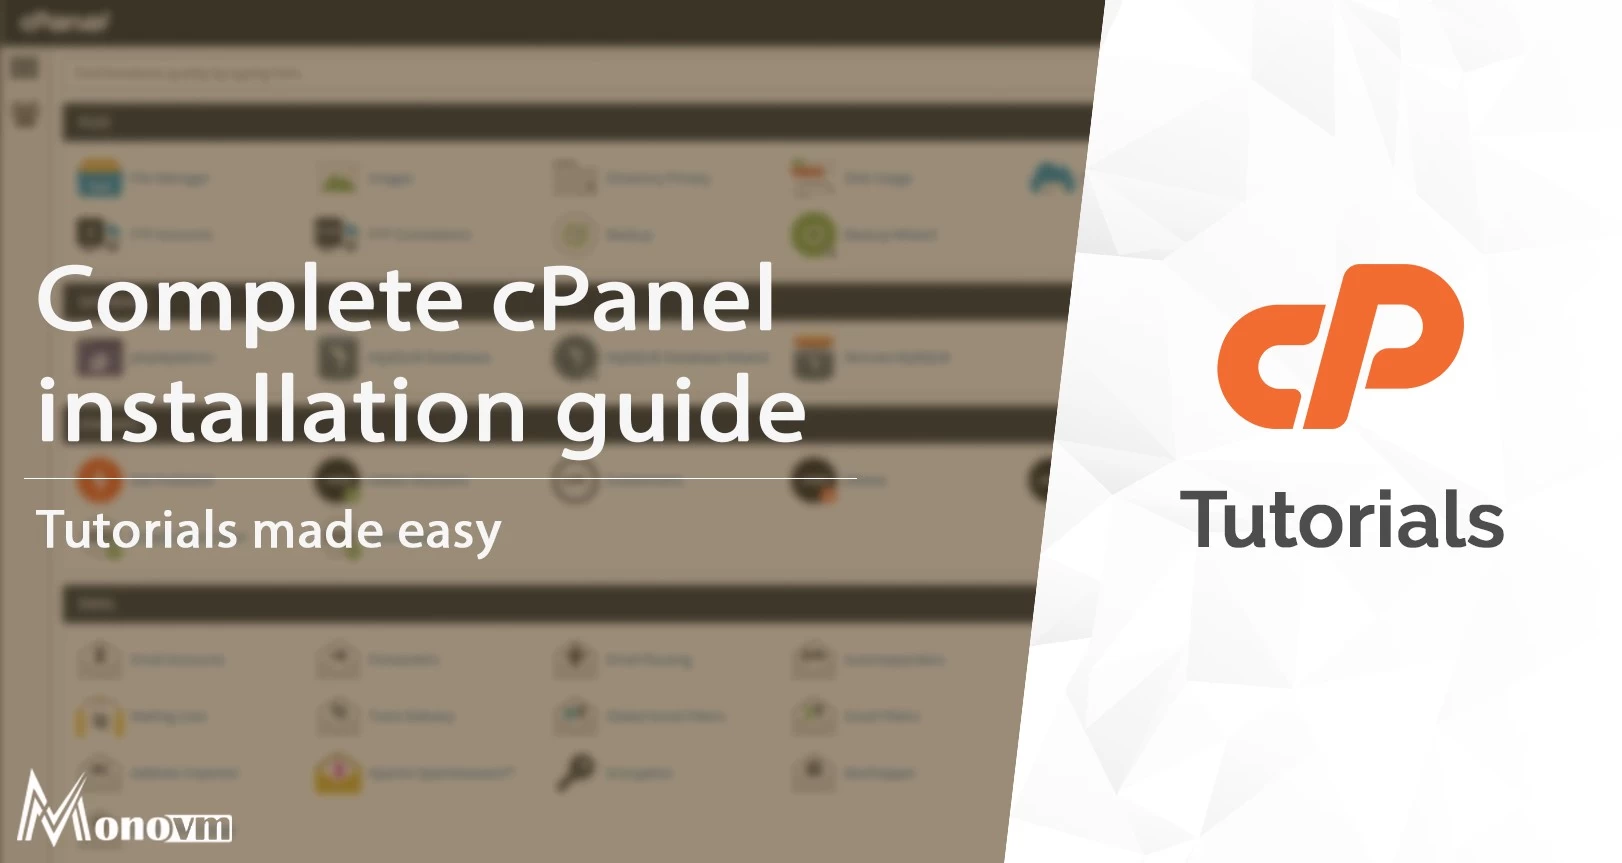 How to install cPanel, Full cPanel Installation Guide